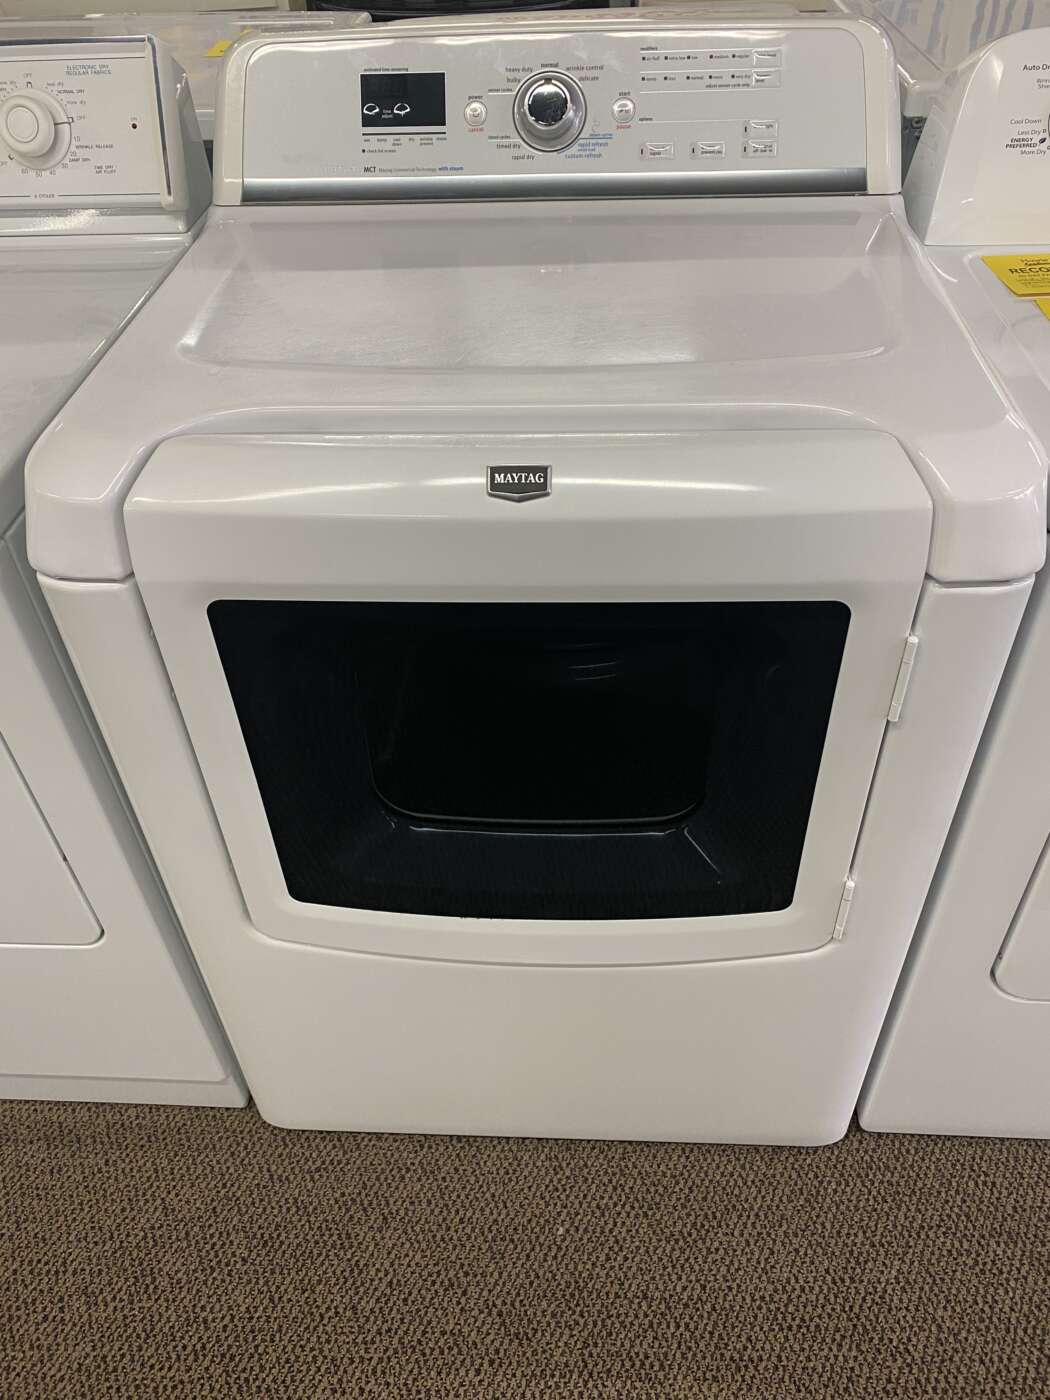 Reconditioned MAYTAG 7.3 Cu. Ft. Electric Dryer